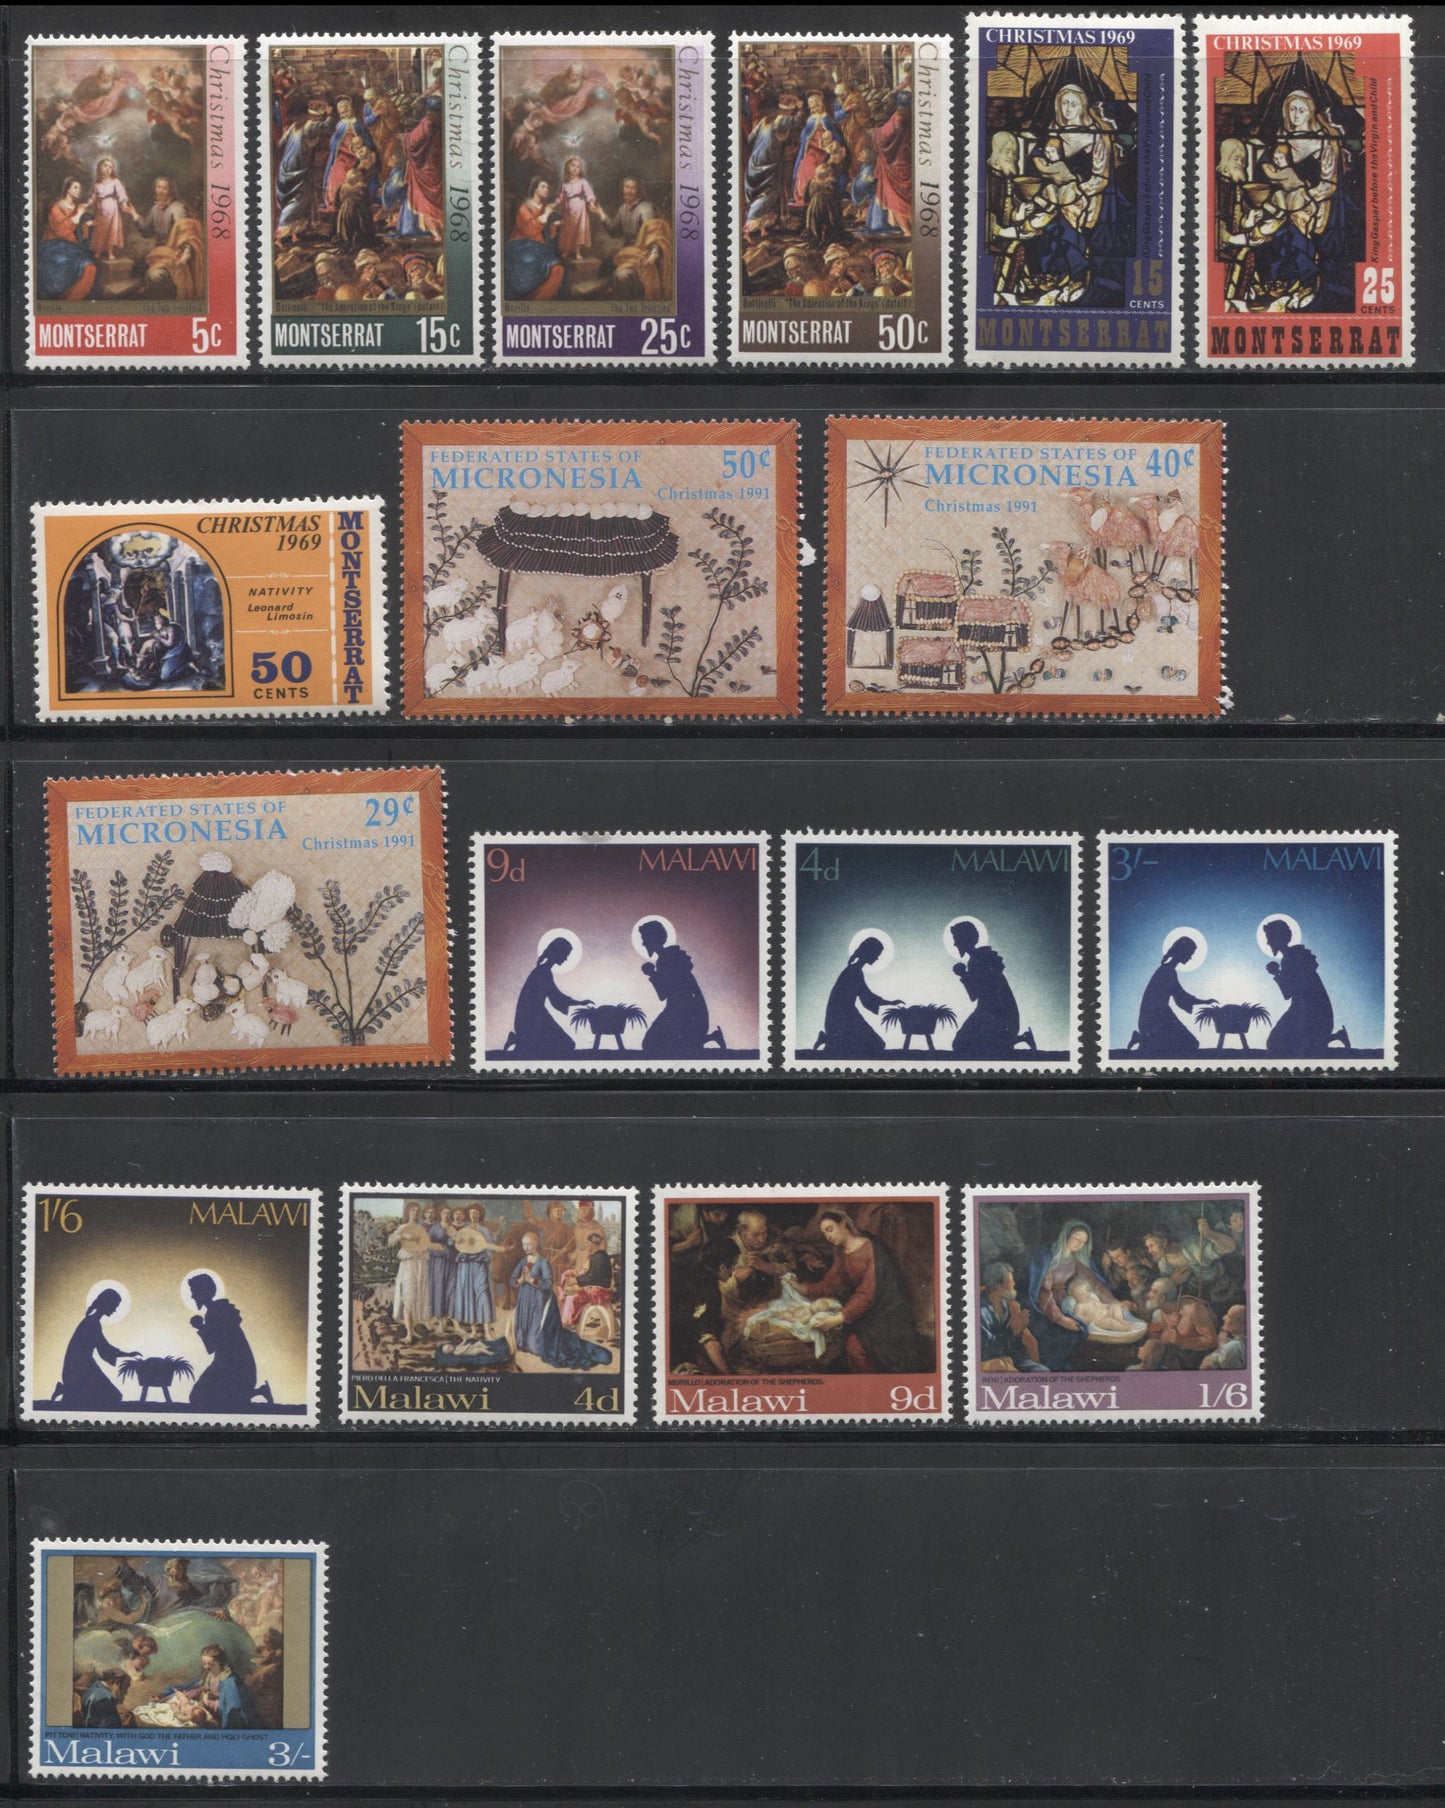 Lot 257 Malawi - Montserrat 1960's to 1970's Christmas Issues, A Small Selection of 5 VFNH Sets